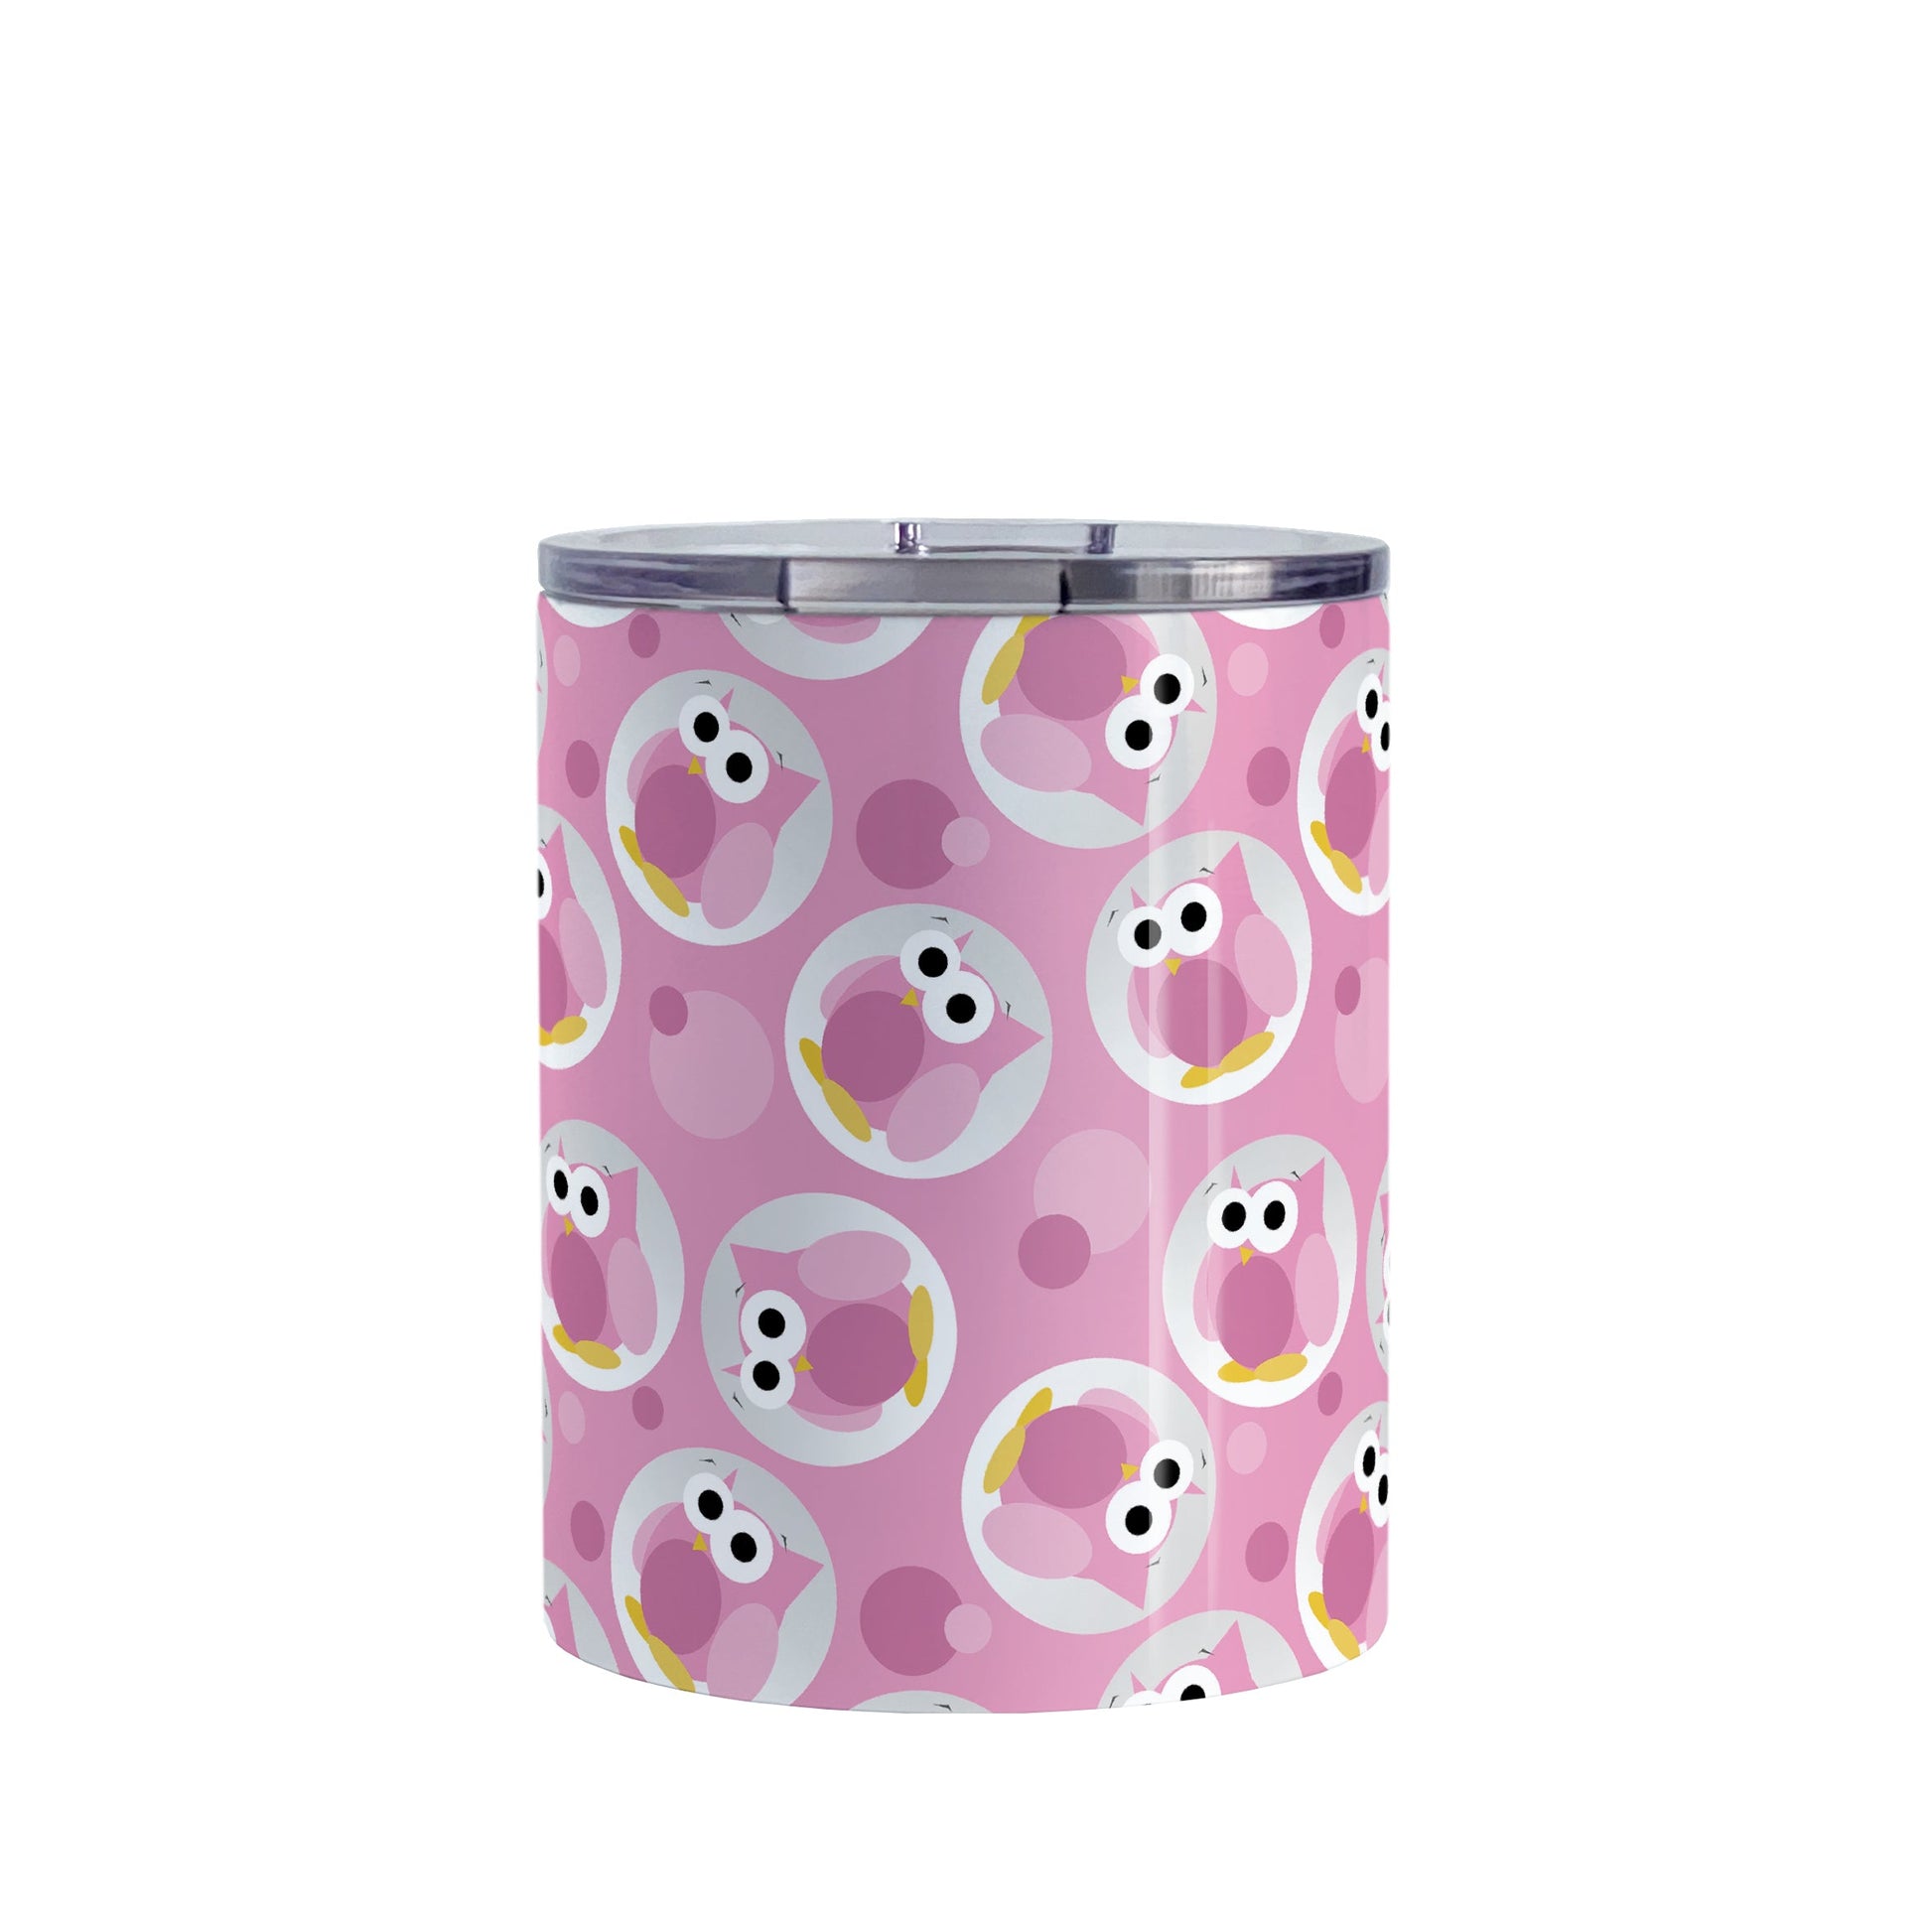 Funny Cute Pink Owl Pattern Tumbler Cup (10oz, stainless steel insulated) at Amy's Coffee Mugs